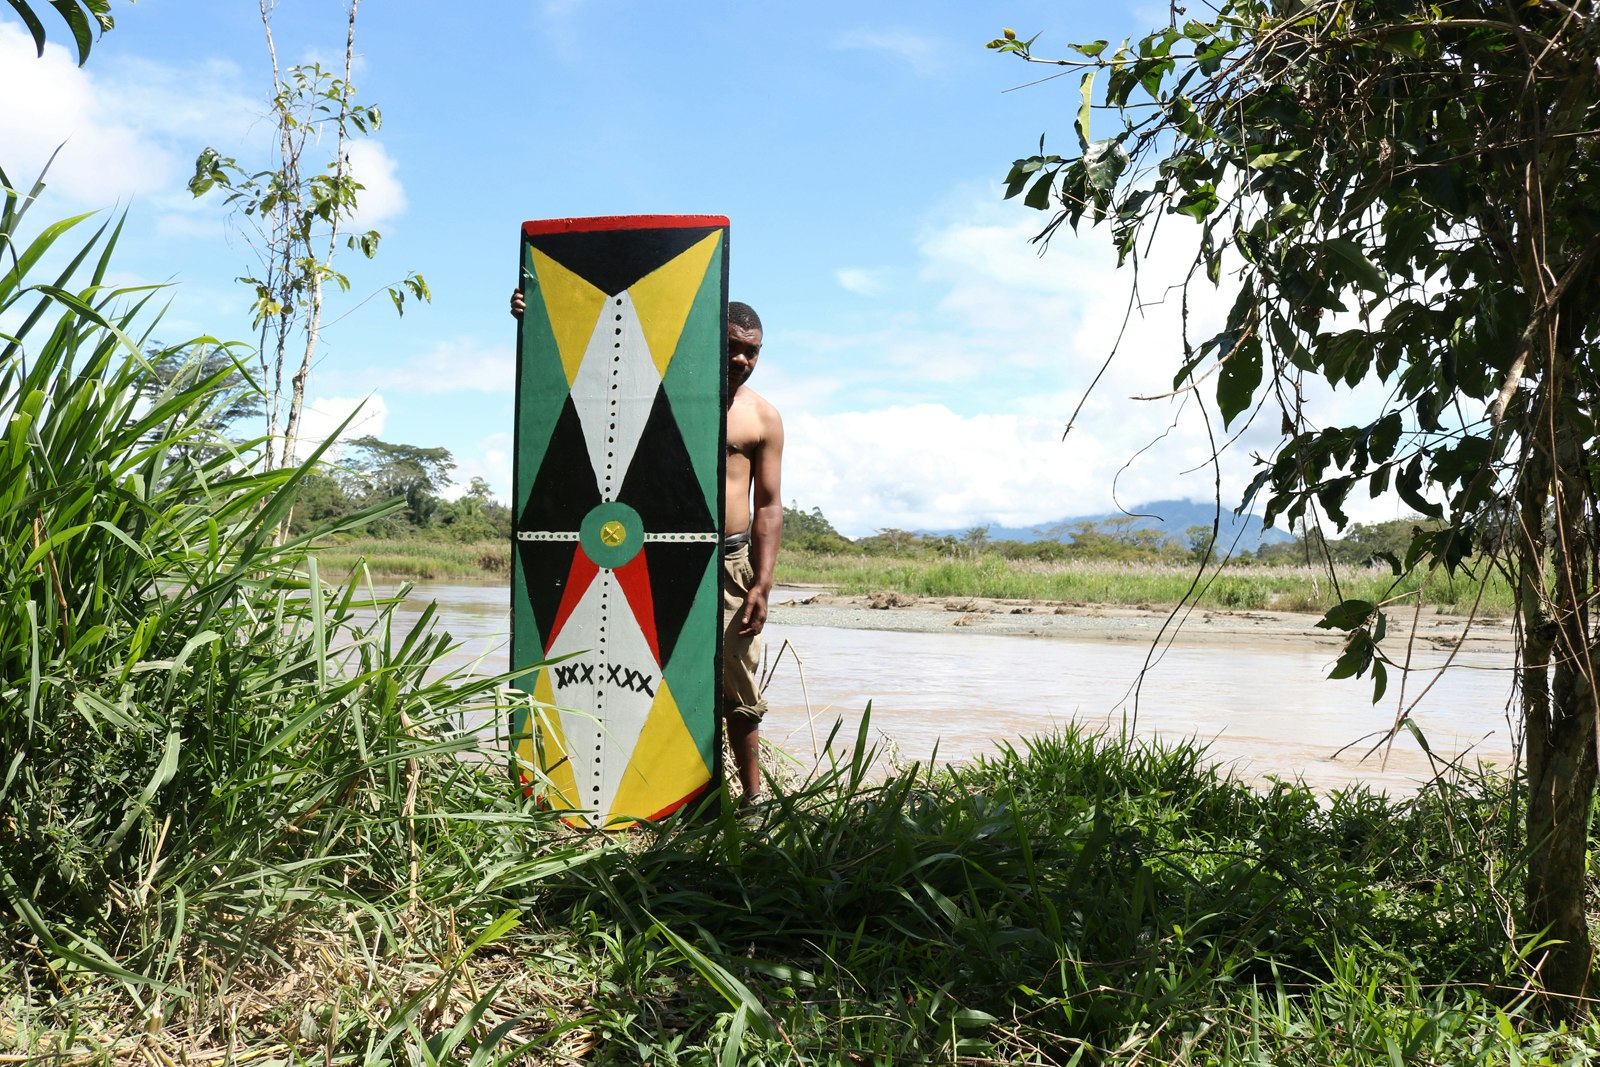 A Pasifika man stands behind a kuman (shield) painted with a geometric pattern of green, yellow, white, red and black shapes. He is standing amongst vegetation on a river bank.